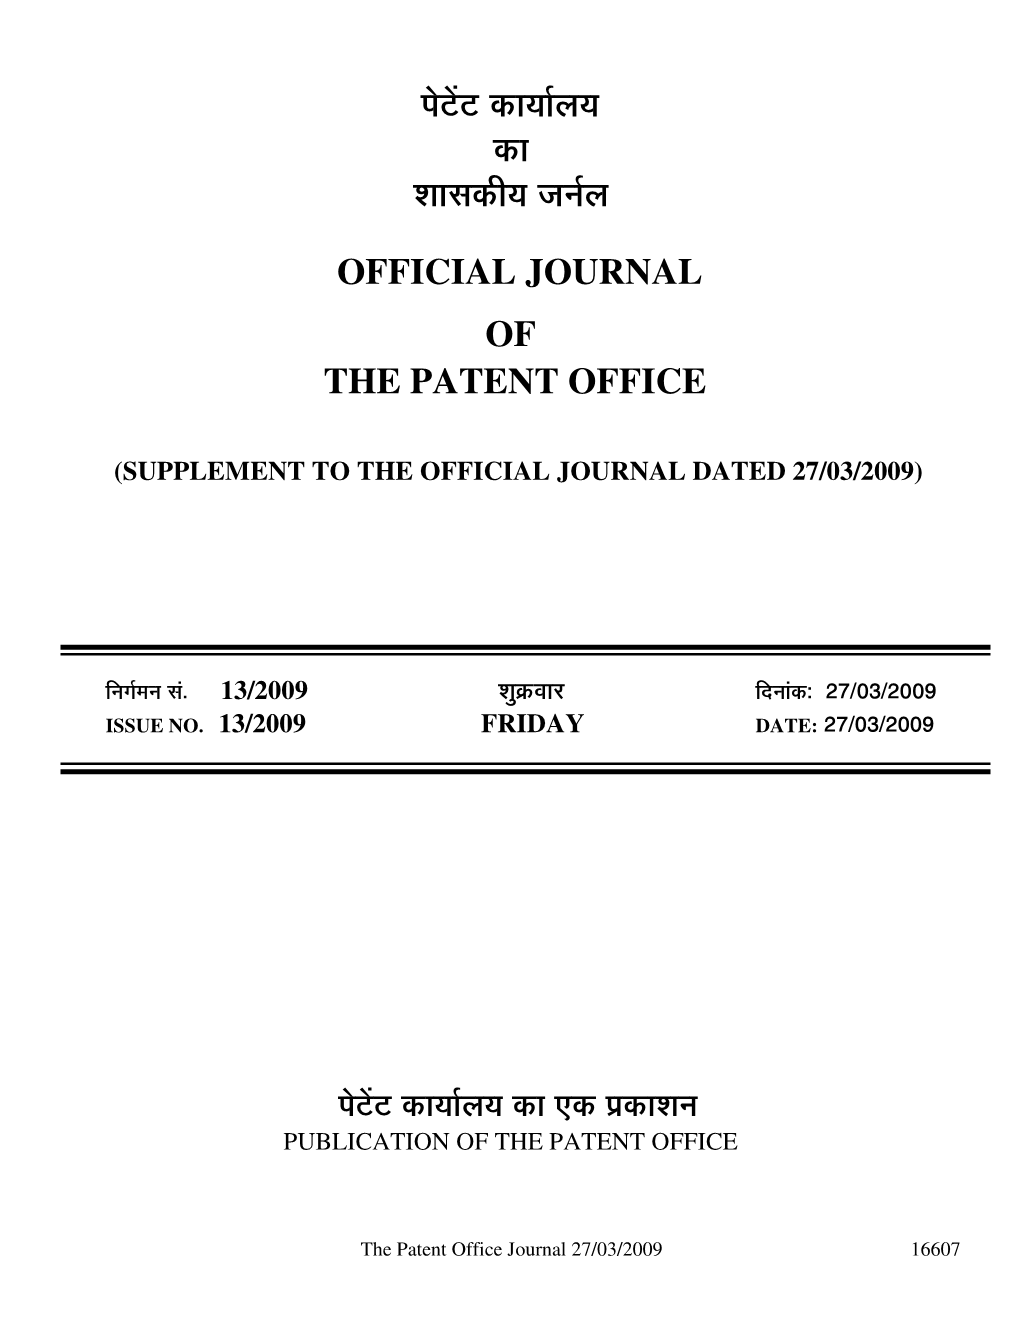 Official Journal of the Patent Office